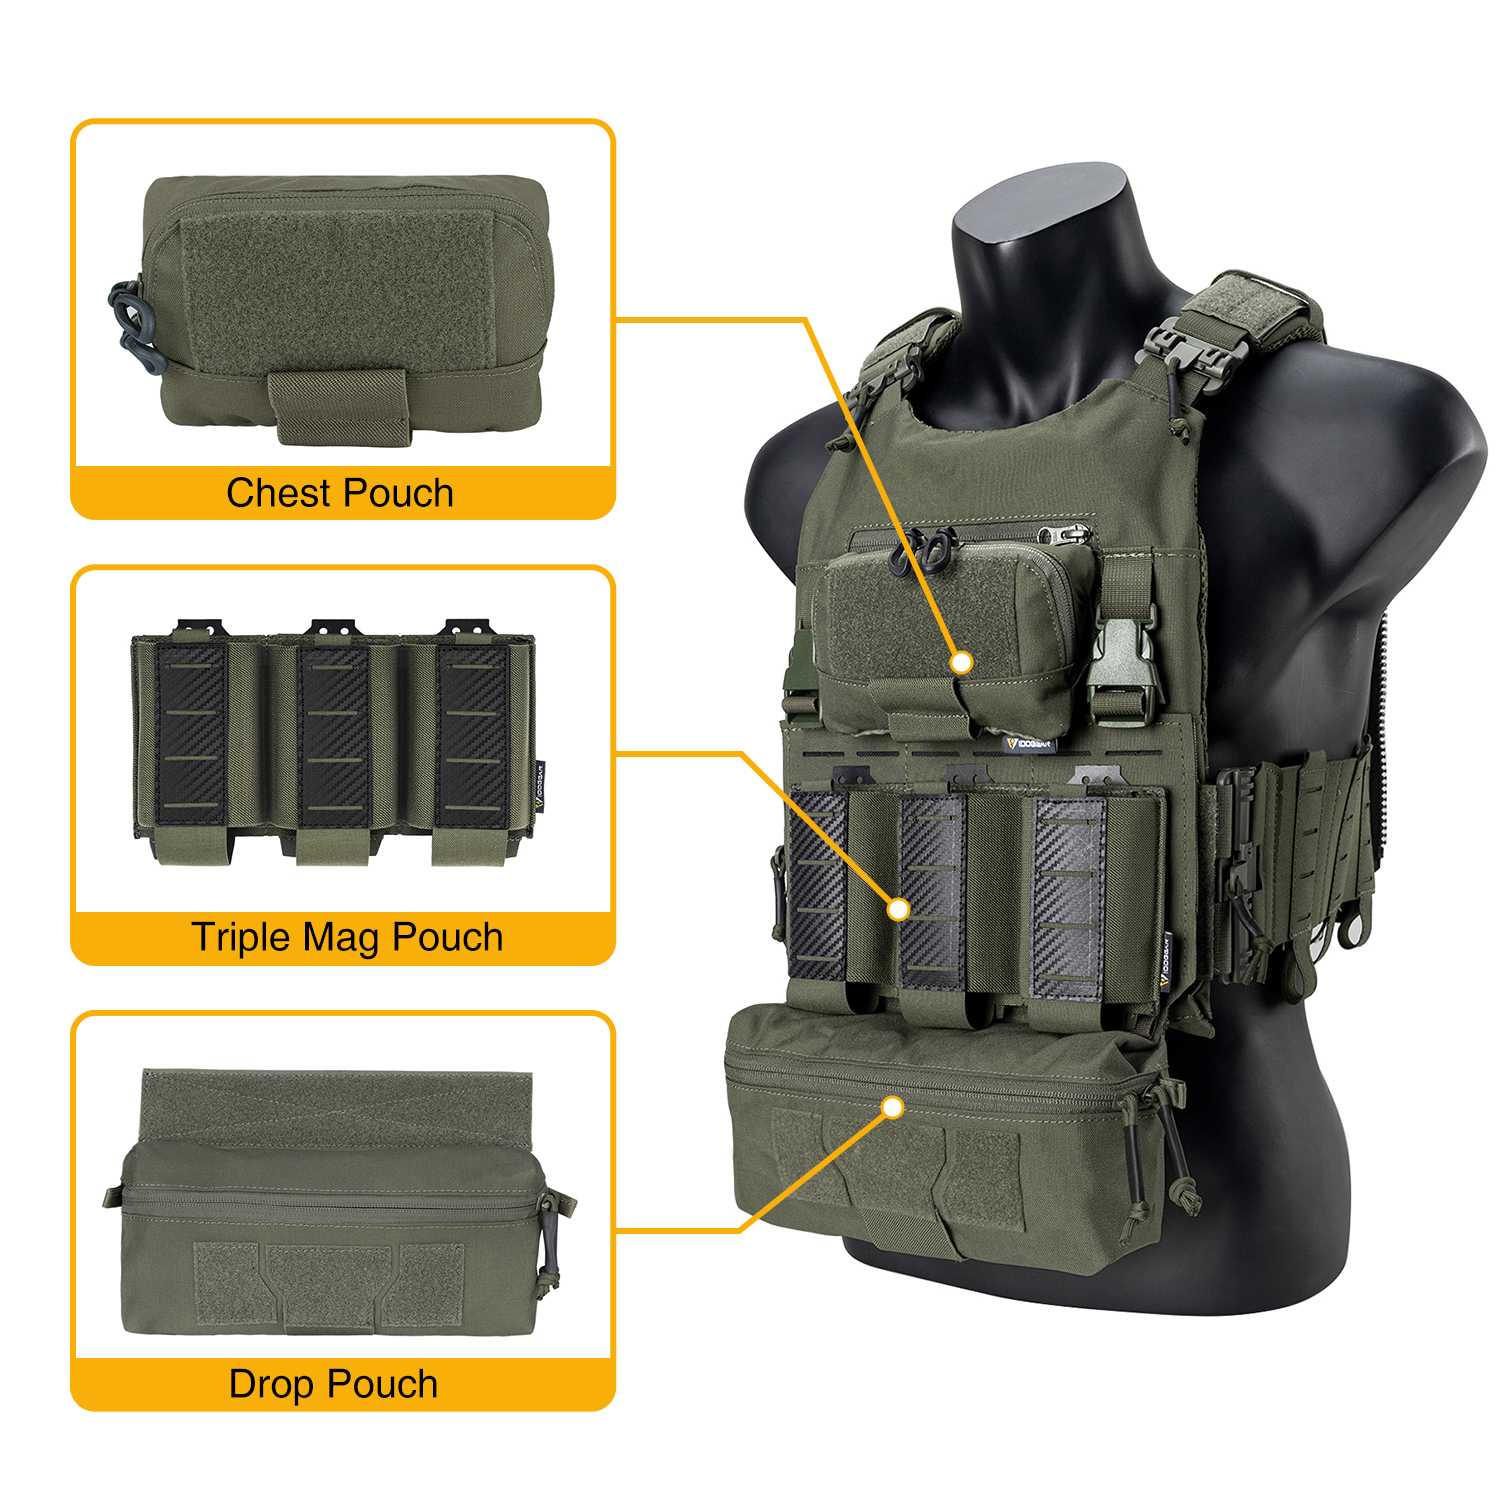 IDOGEAR Tactical Vest with Drop Pouch, Chest Pouch and Triple Mag Pouch Camouflage Military Quick Release Laser Cut Combat Vest Set-IDOGEAR INDUSTRIAL